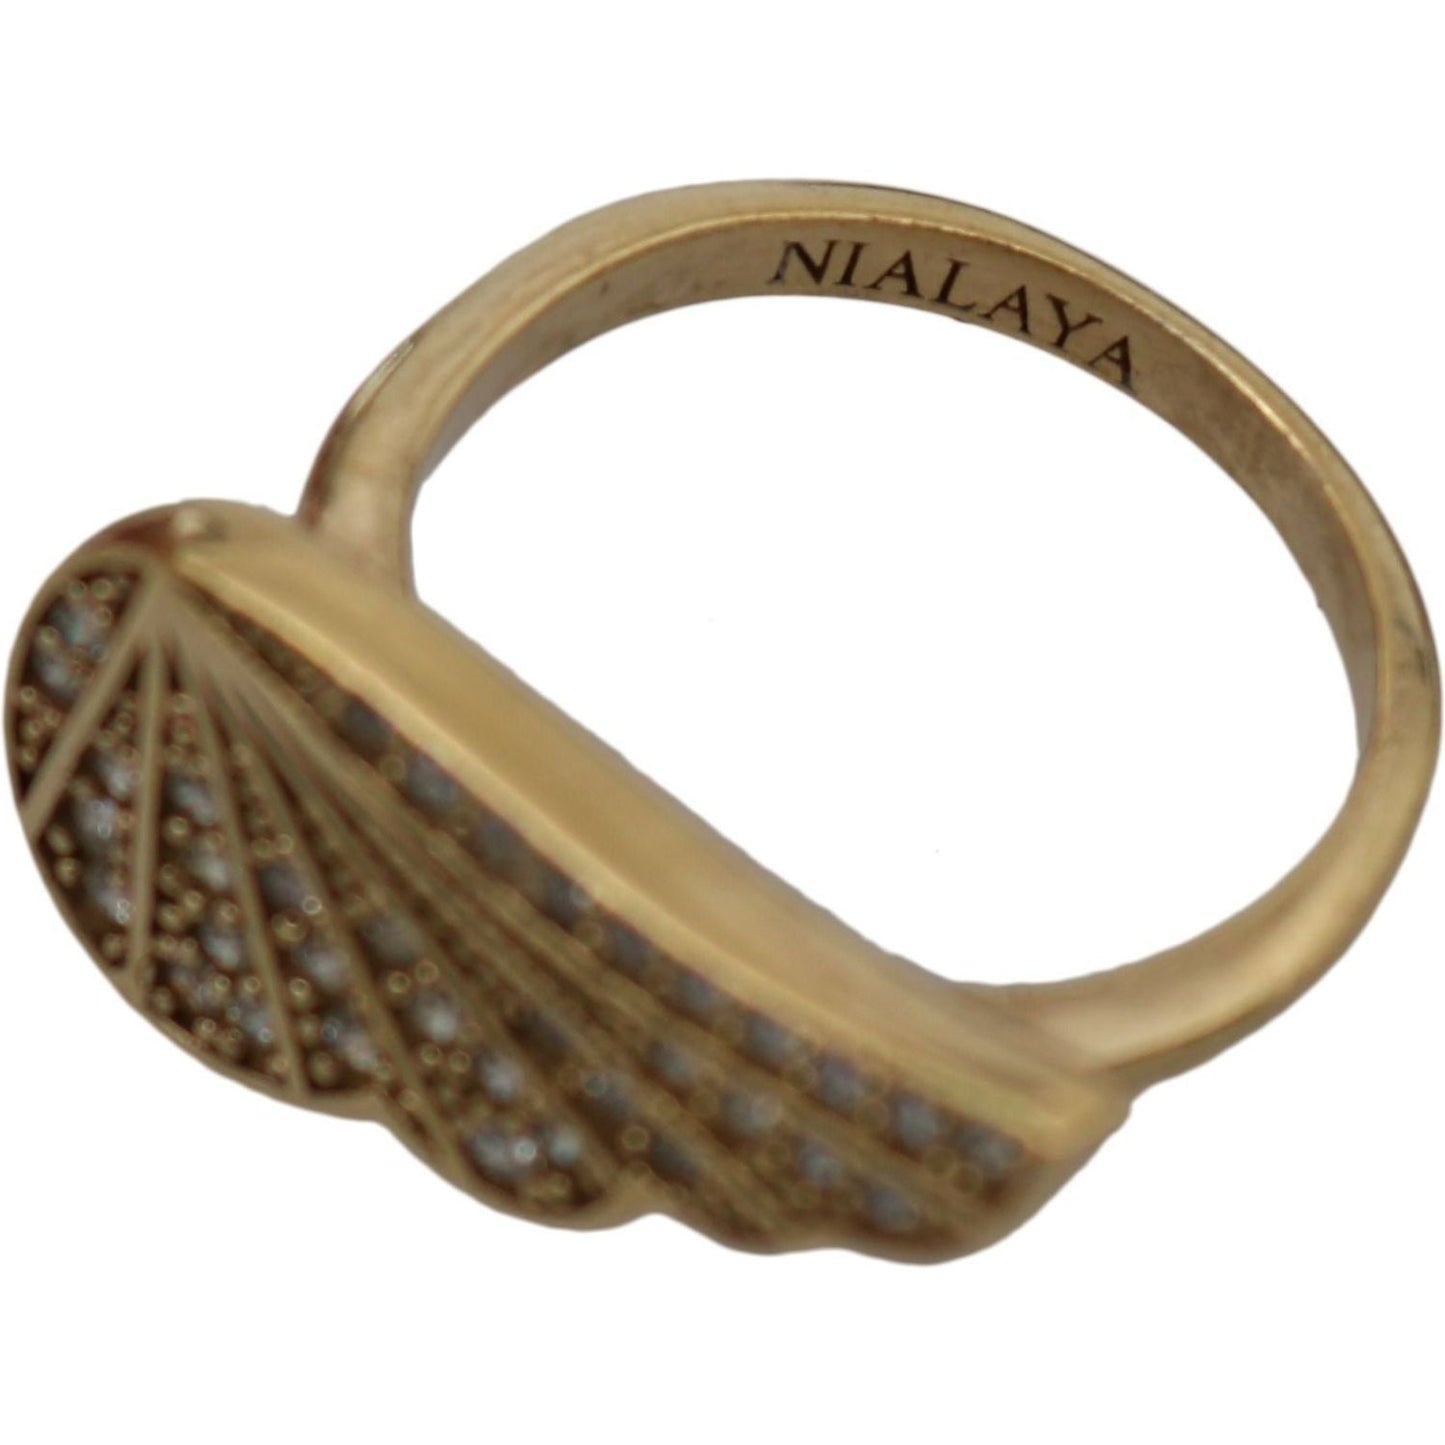 Nialaya Elegant Gold-Crystal Embellished Ring Ring gold-wing-clear-cz-925-silver-authentic-women IMG_8124-aa9efaa4-494.jpg